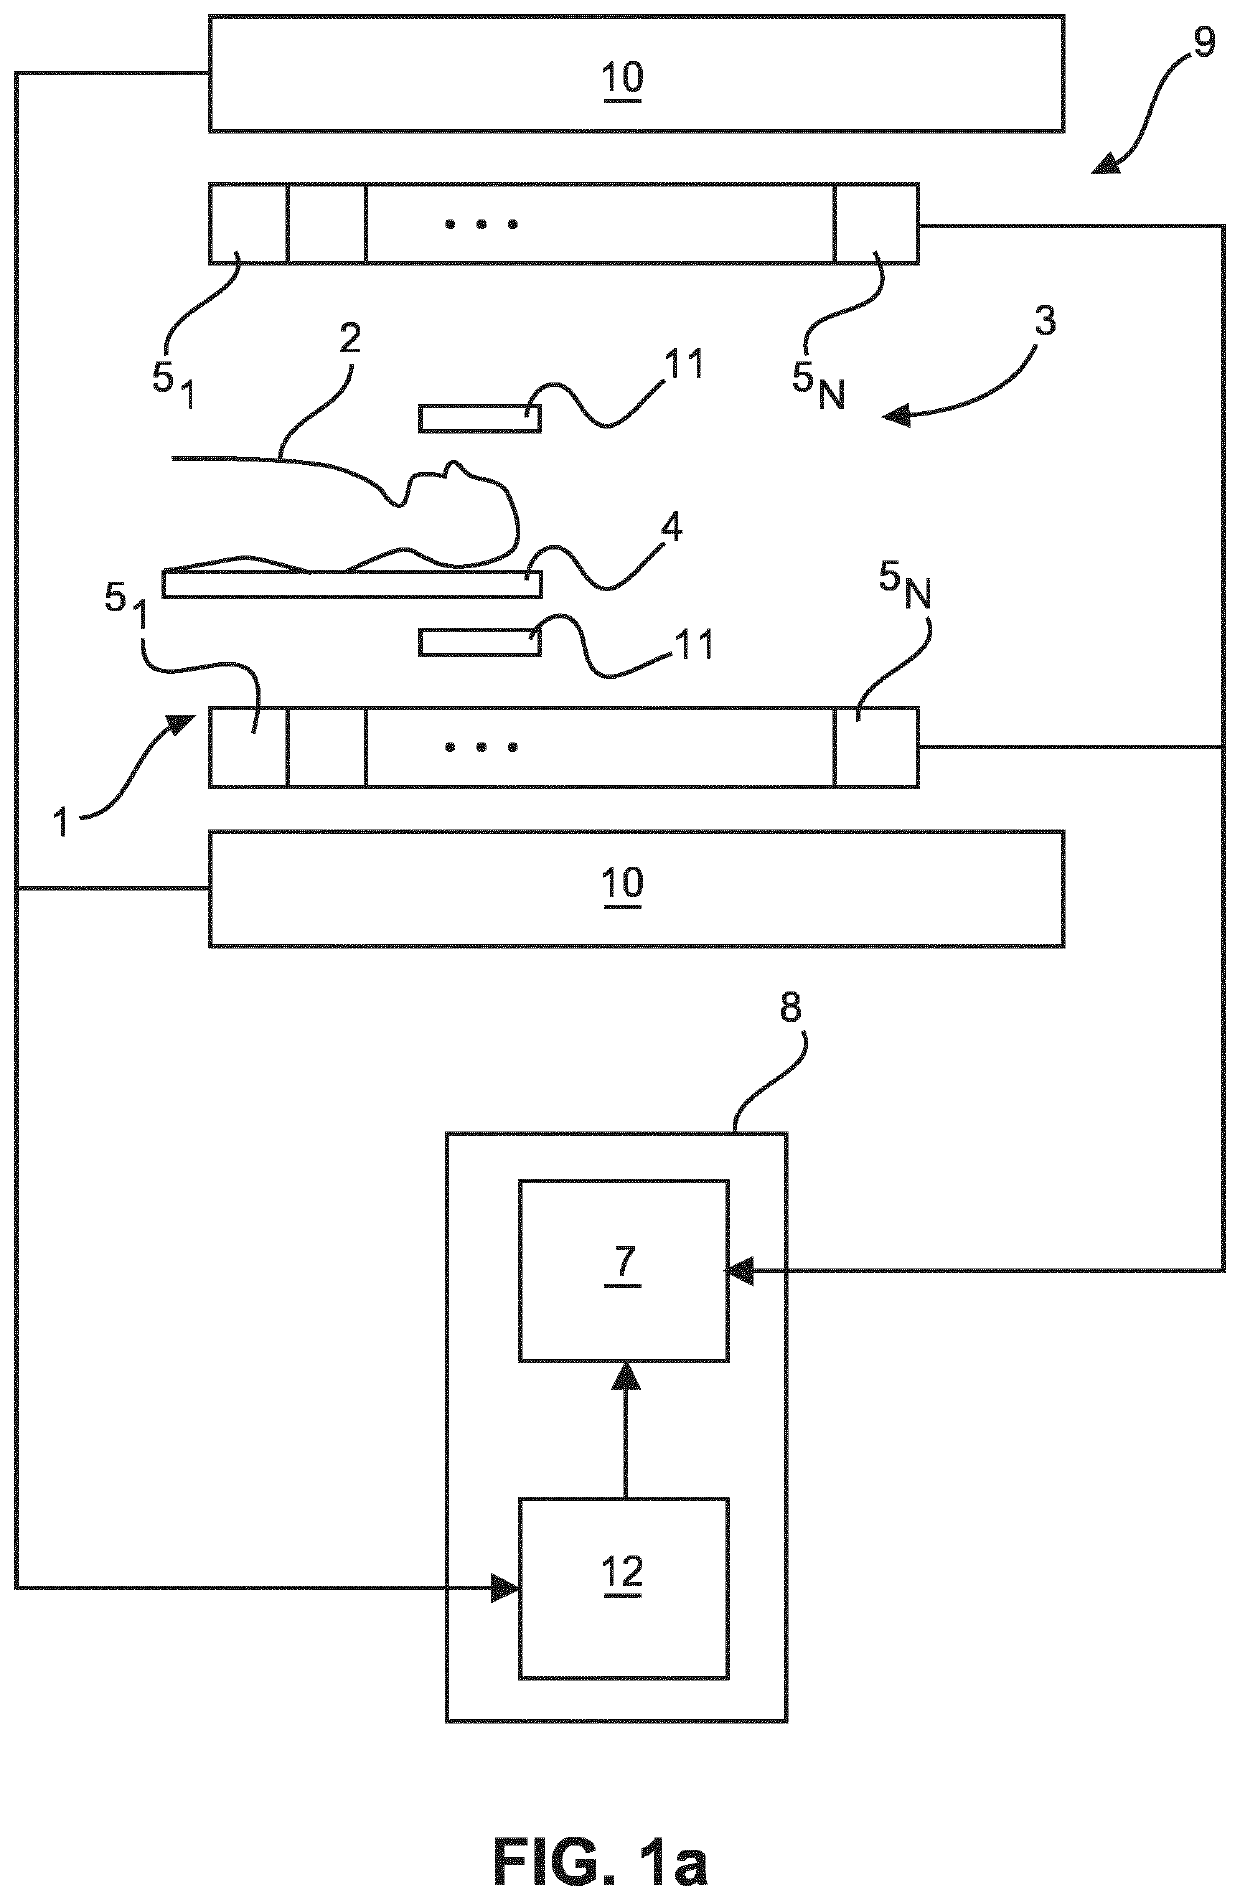 Estimation of an attenuation map based on scattered coincidences in a PET system